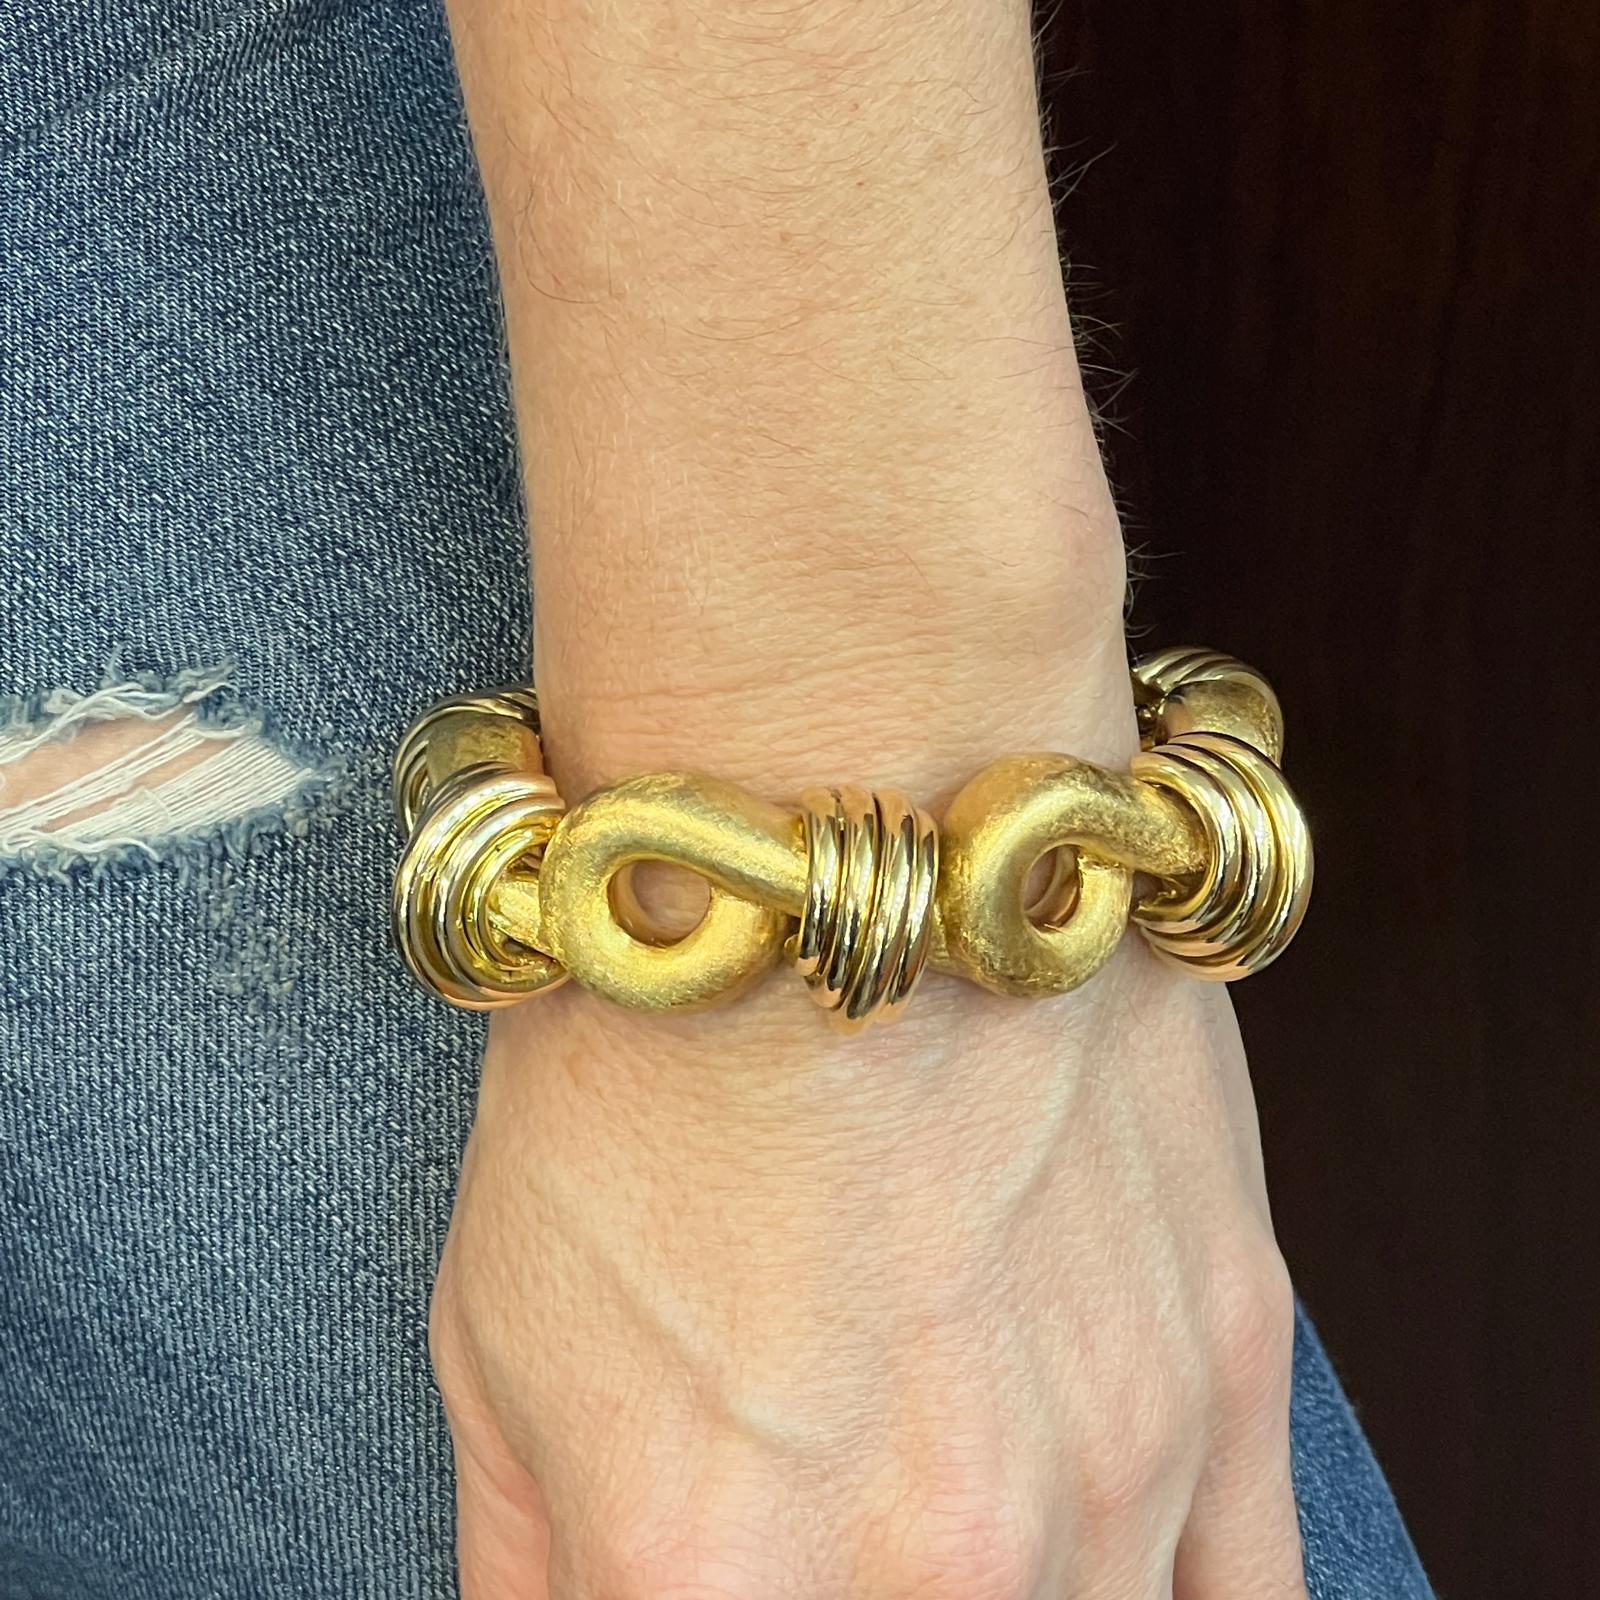 Fabulous heavy gold bracelet handcrafted in 18 karat yellow gold. The bracelet features satin finish and high polish ribbed sections. The bracelet measures 8.25 inches in length and 20mm in width. 